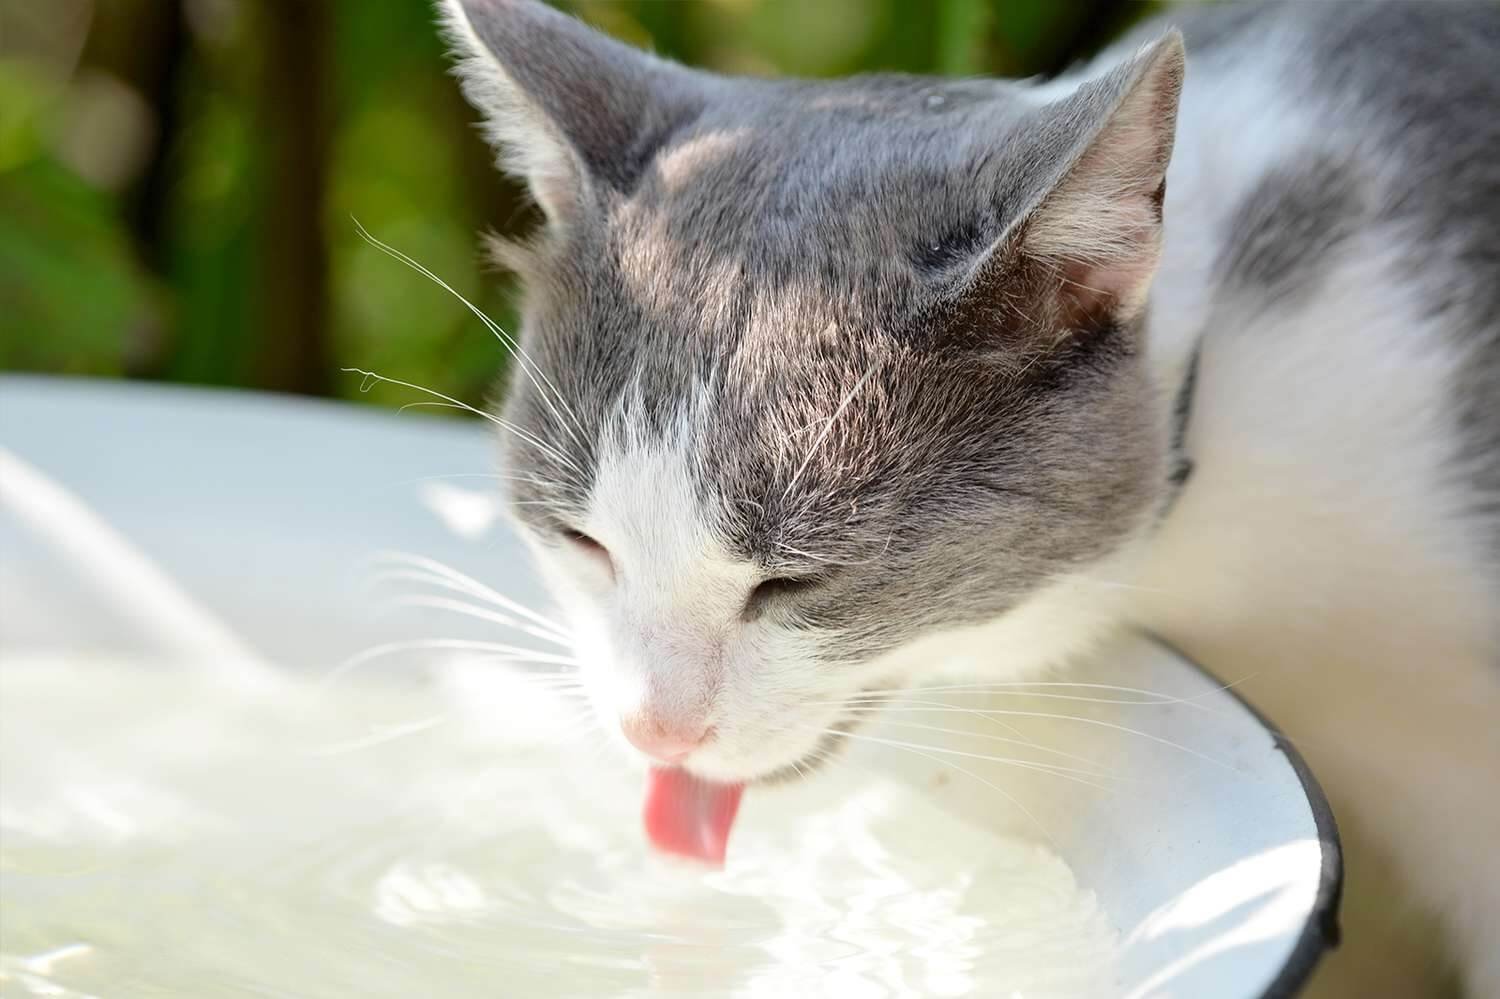 Make sure there's fresh water at all times for cat